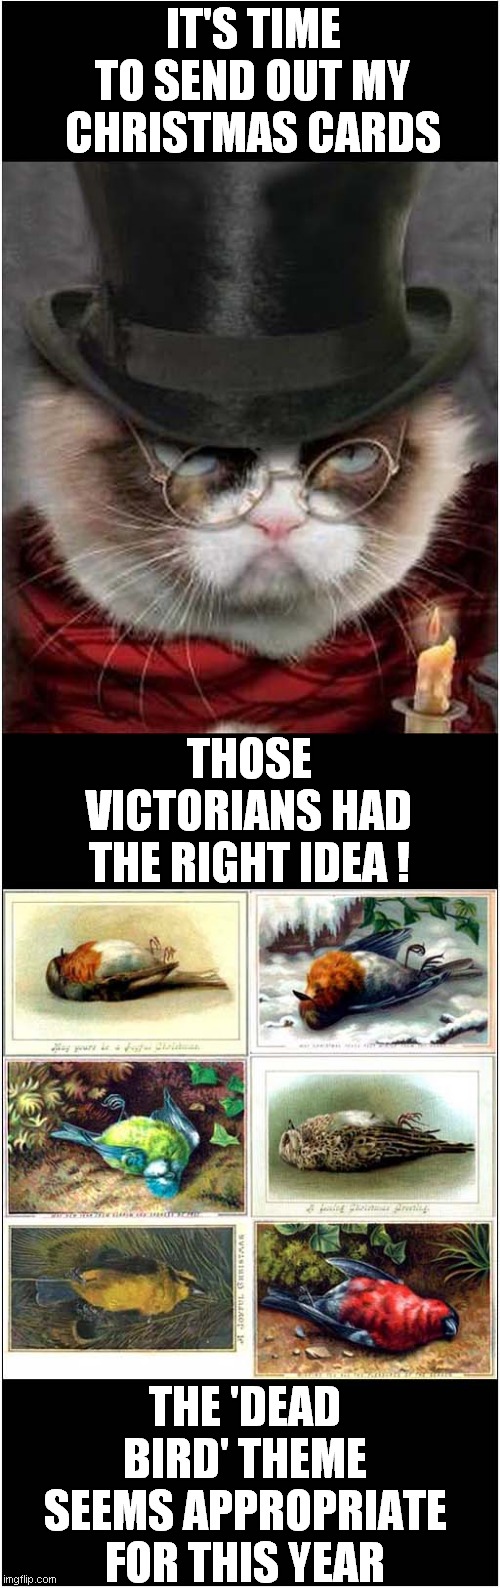 Grumpy Cats Christmas Wishes | IT'S TIME TO SEND OUT MY CHRISTMAS CARDS; THOSE VICTORIANS HAD THE RIGHT IDEA ! THE 'DEAD BIRD' THEME
SEEMS APPROPRIATE FOR THIS YEAR | image tagged in grumpy cat,grumpy cat christmas,christmas cards | made w/ Imgflip meme maker